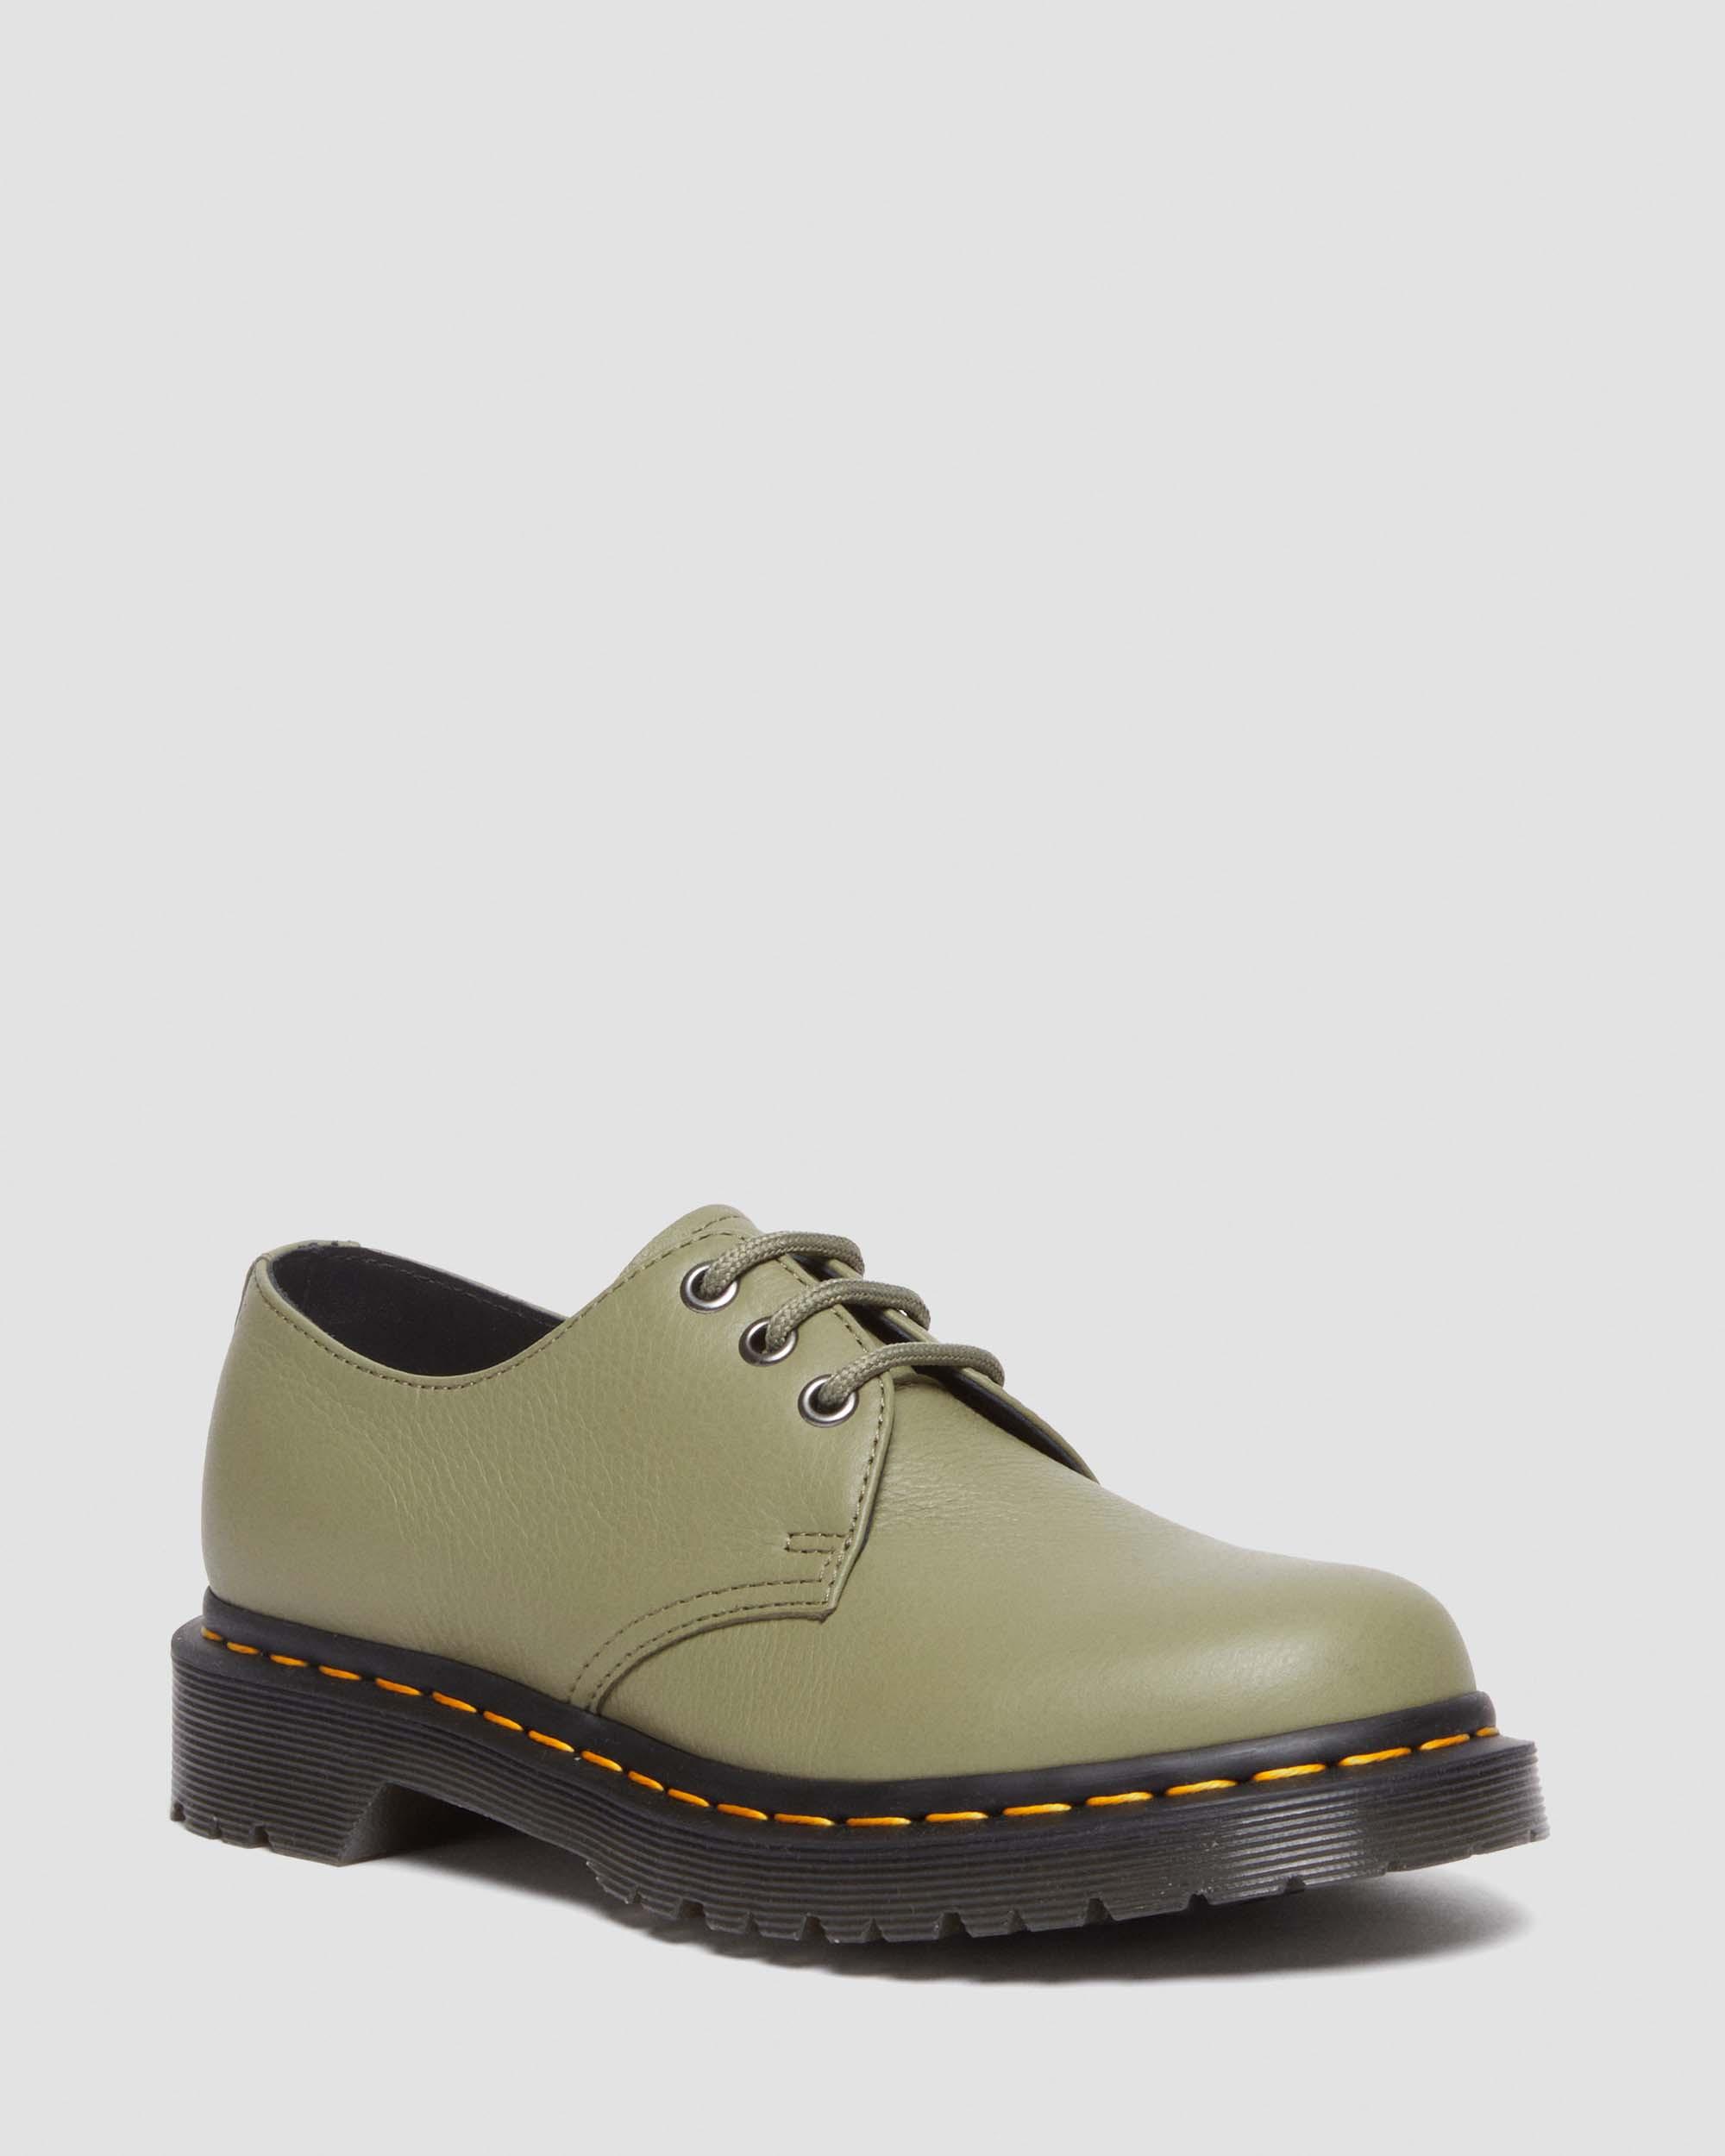 Dr. Martens' 1461 Women's Virginia Leather Oxford Shoes In Green